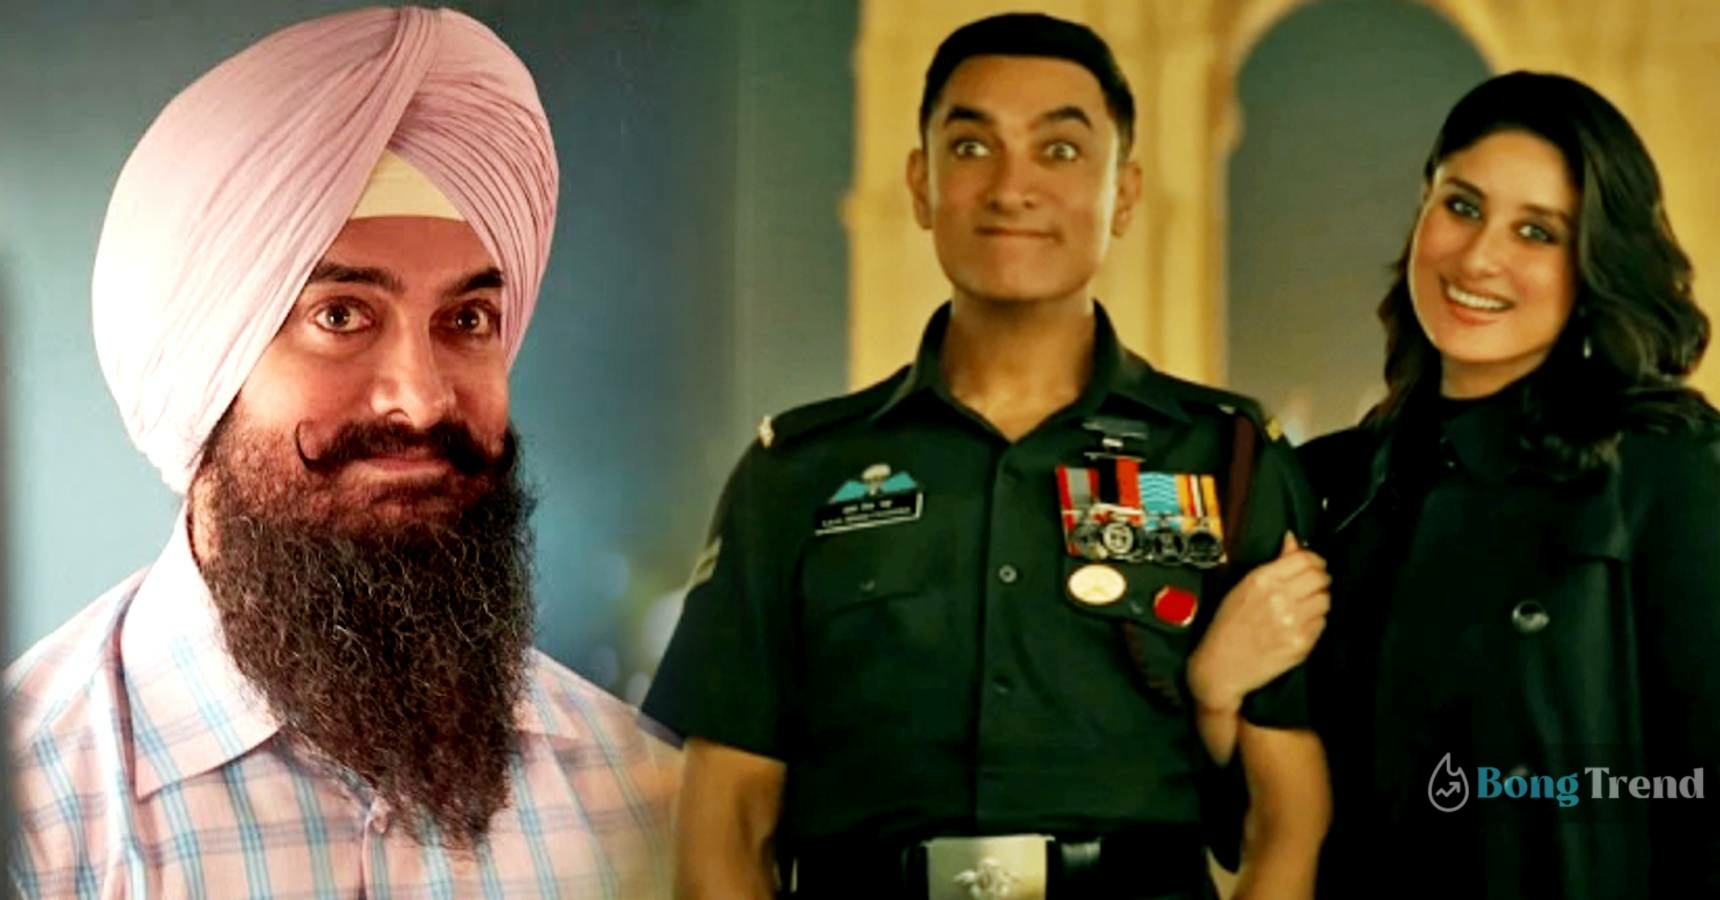 Aamir Khan’s Laal Singh Chaddha might release in Pakistan, Cinepax media group asked for NOC